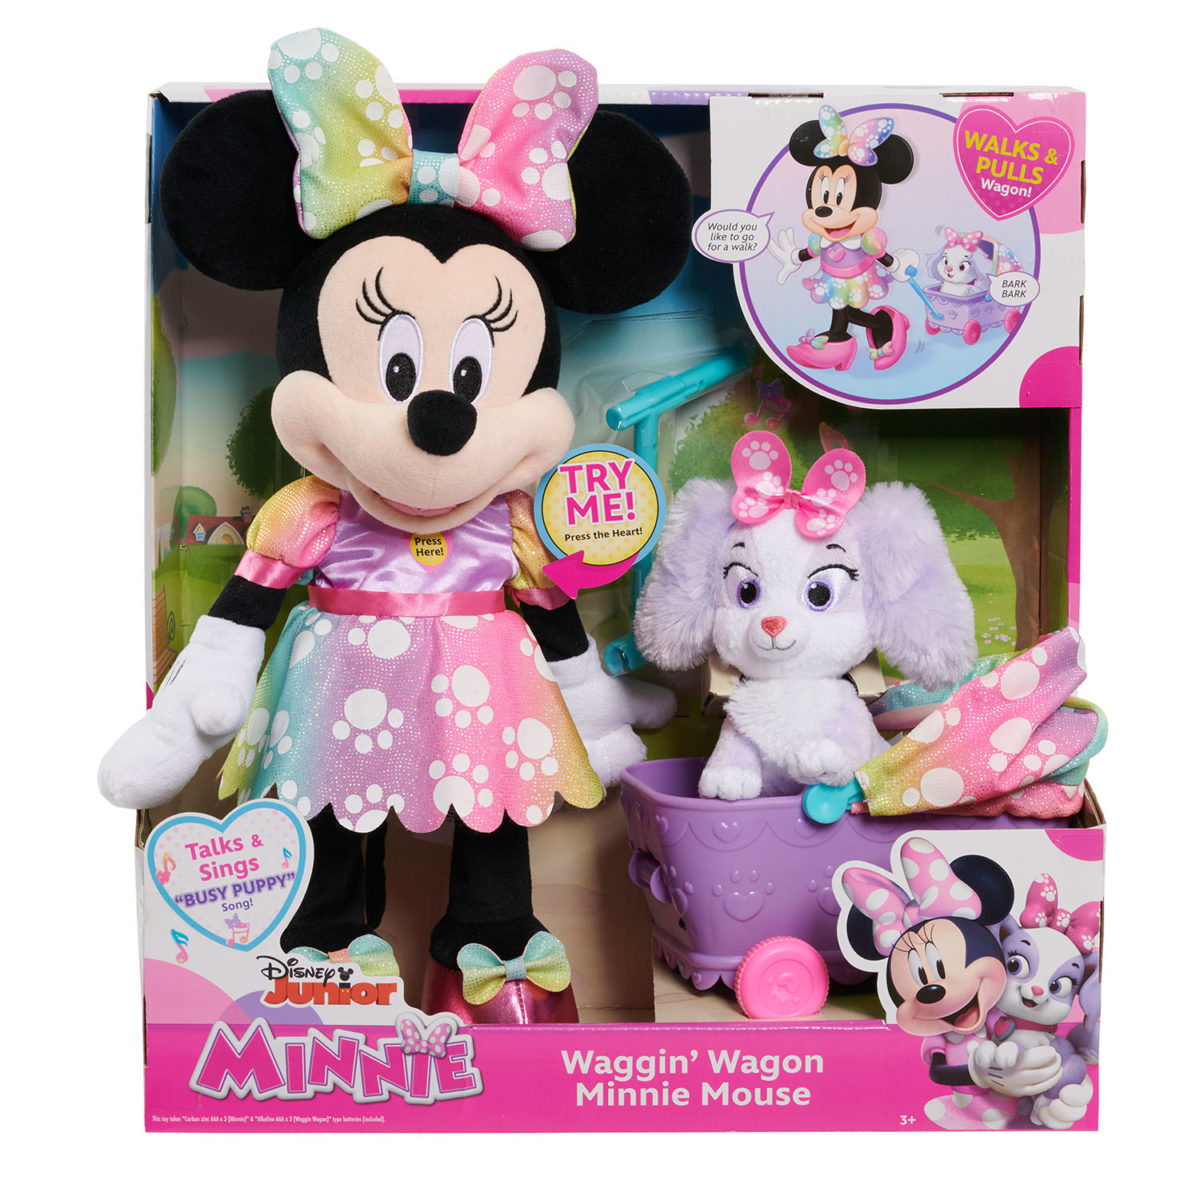 packaging featuring a Minnie Mouse toy